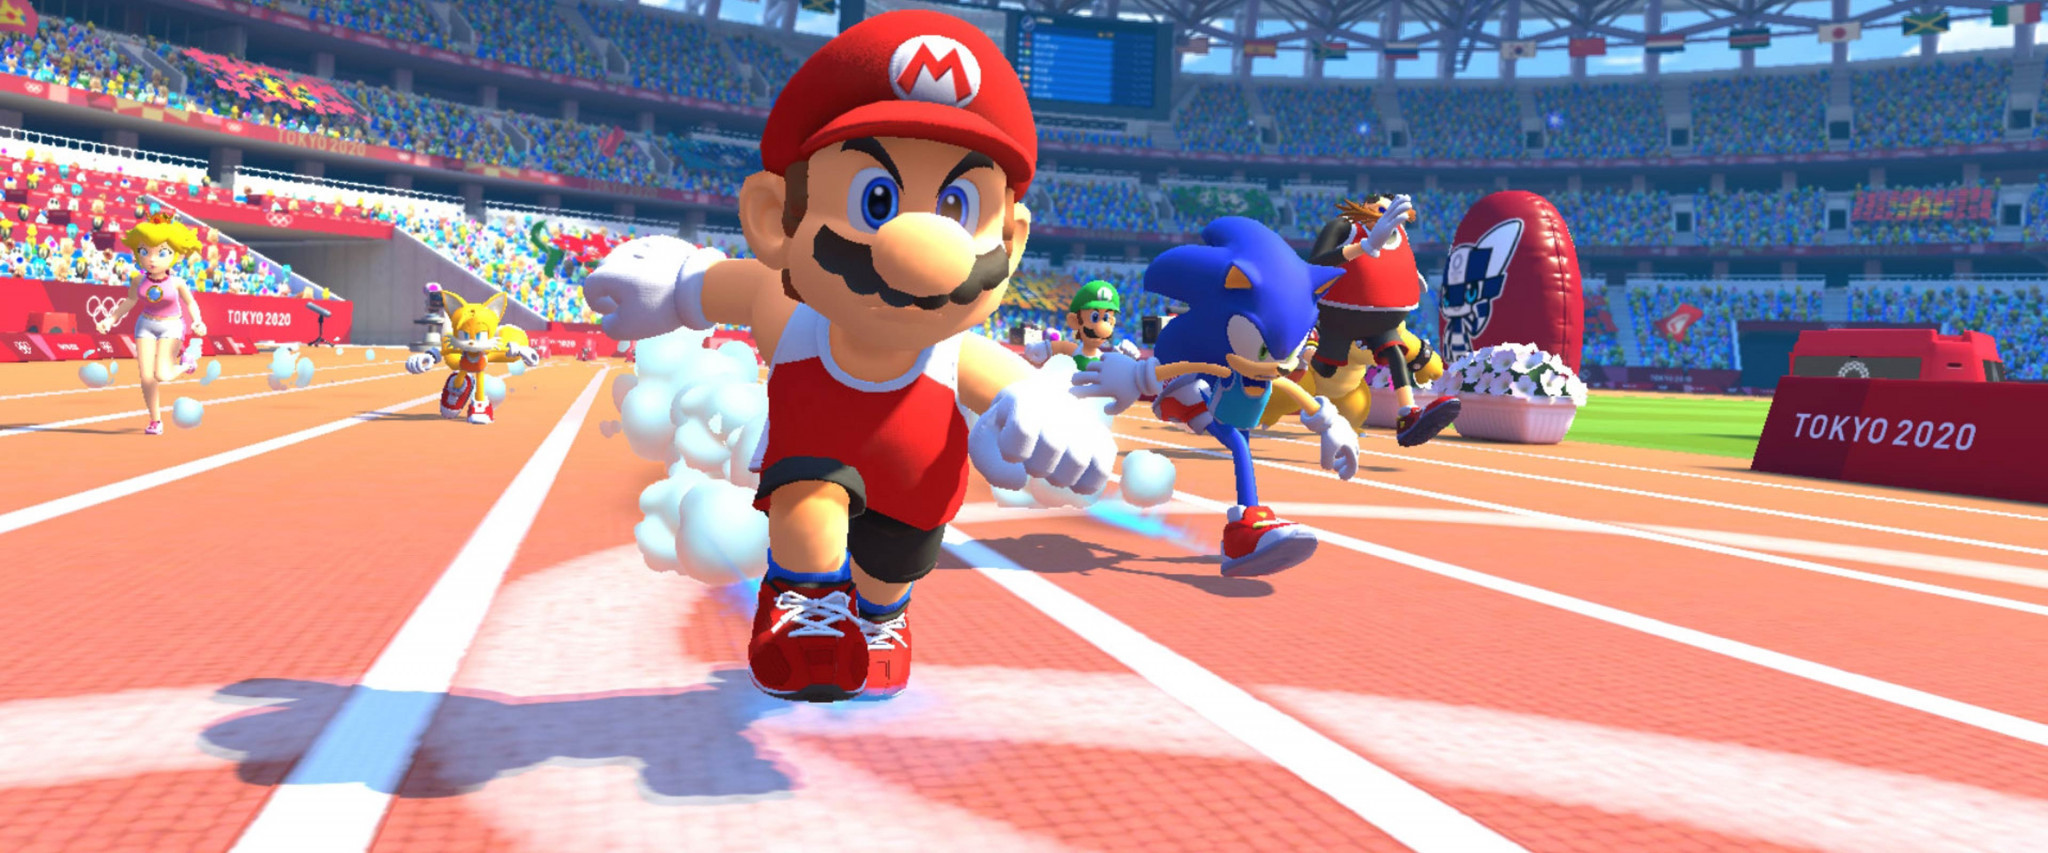 The video game Mario & Sonic at the Olympic Games Tokyo 2020 has been released today in the Americas ©Sega